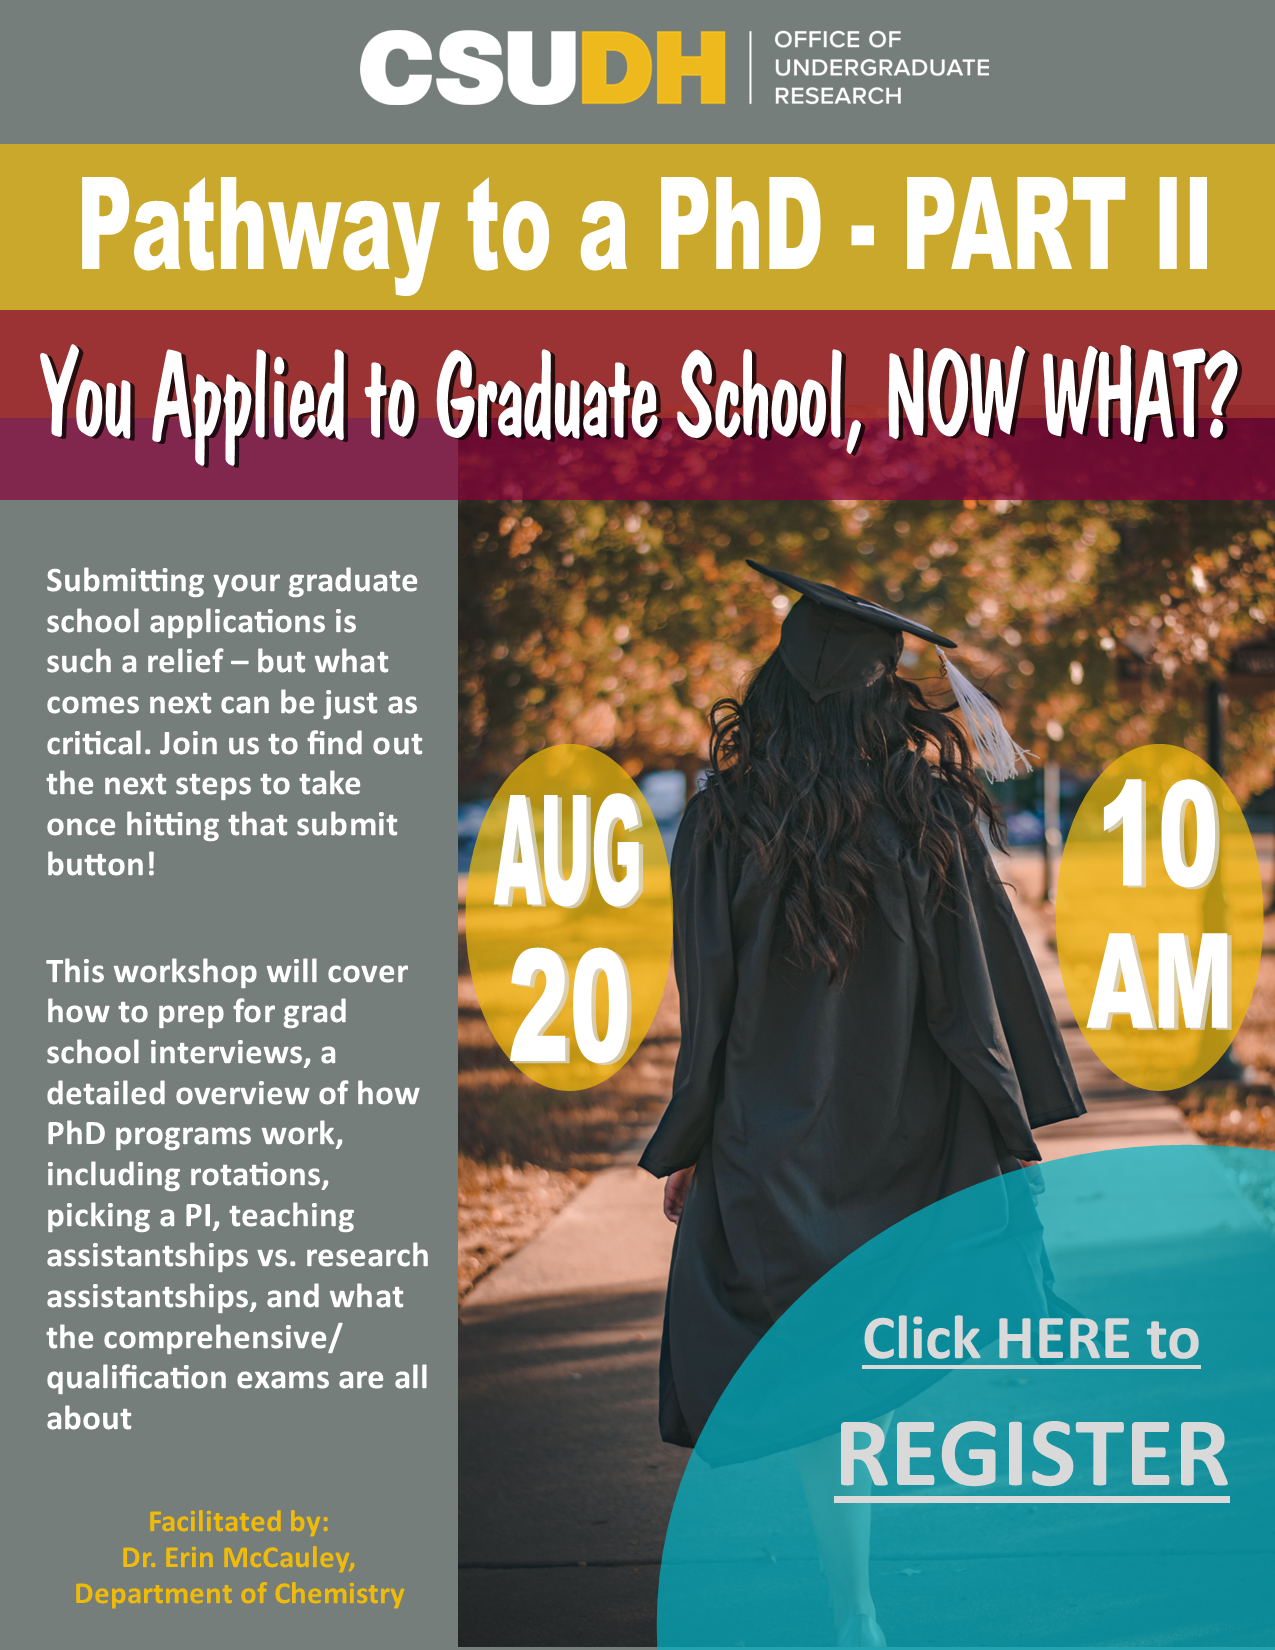 Pathway to PhD Part 2 (8-20-21) Flyer